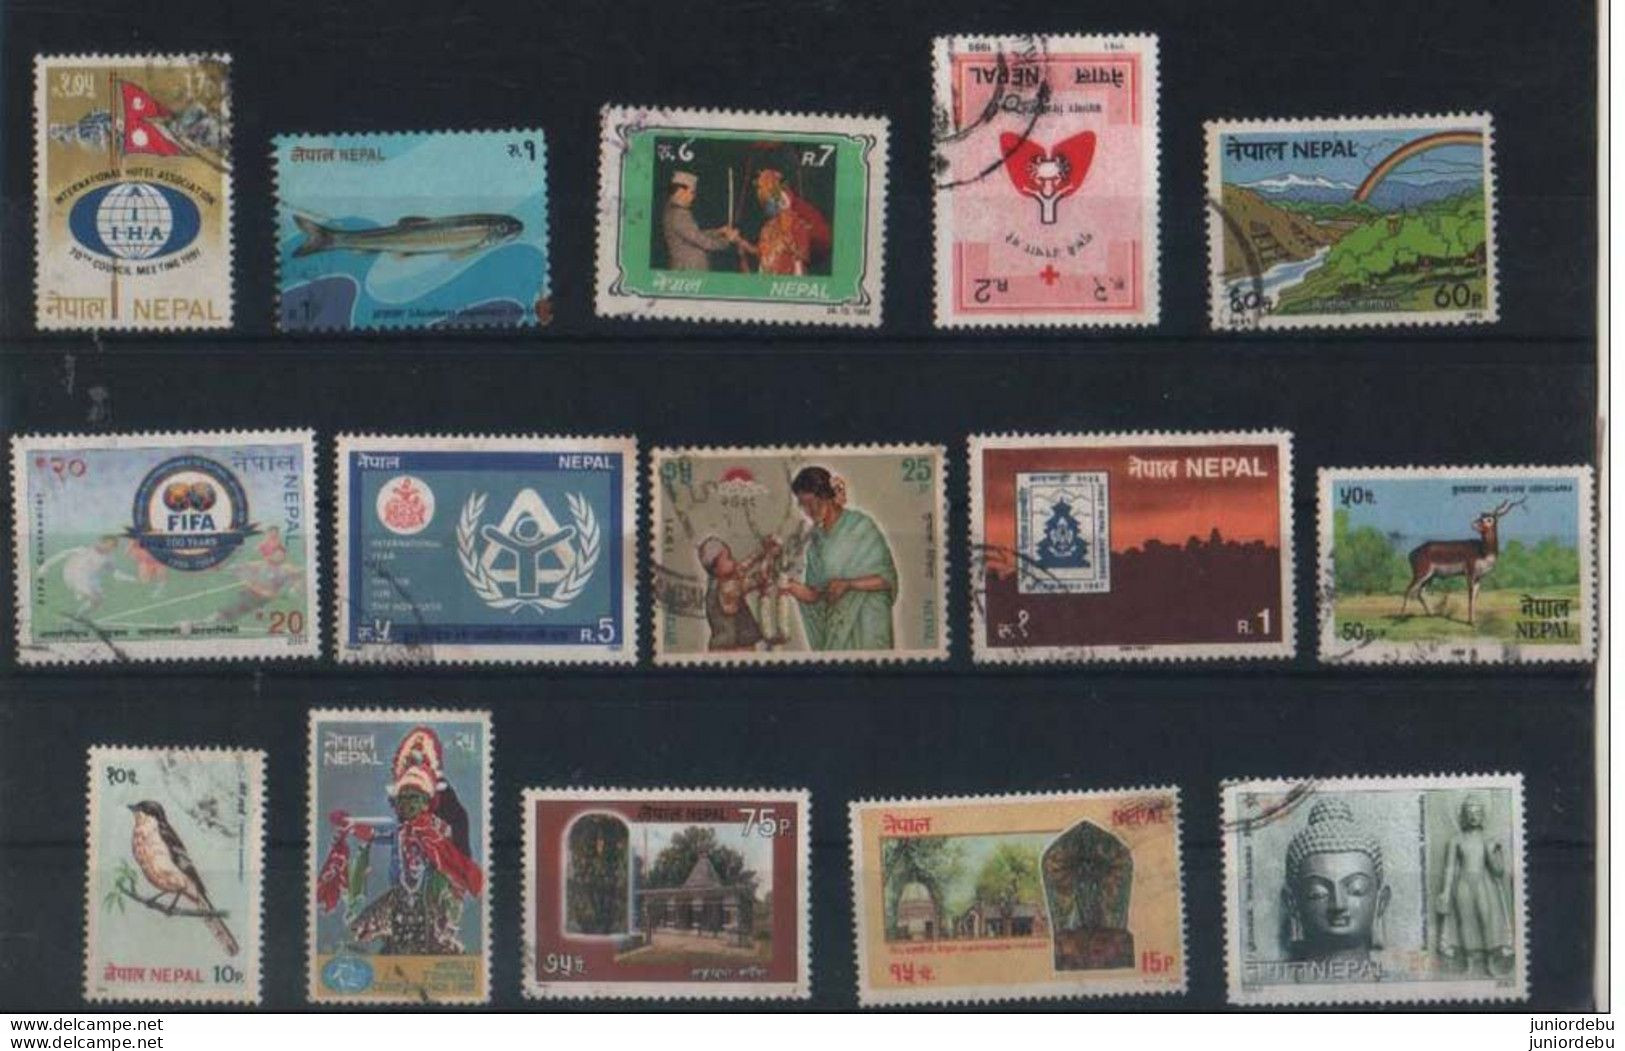 Nepal - 15 Different Stamps -  Used - ( Condition As Per Scan ) ( Soccer, Bird, Fish, Buddha ) ( OL 09/08/2021 ) - Nepal